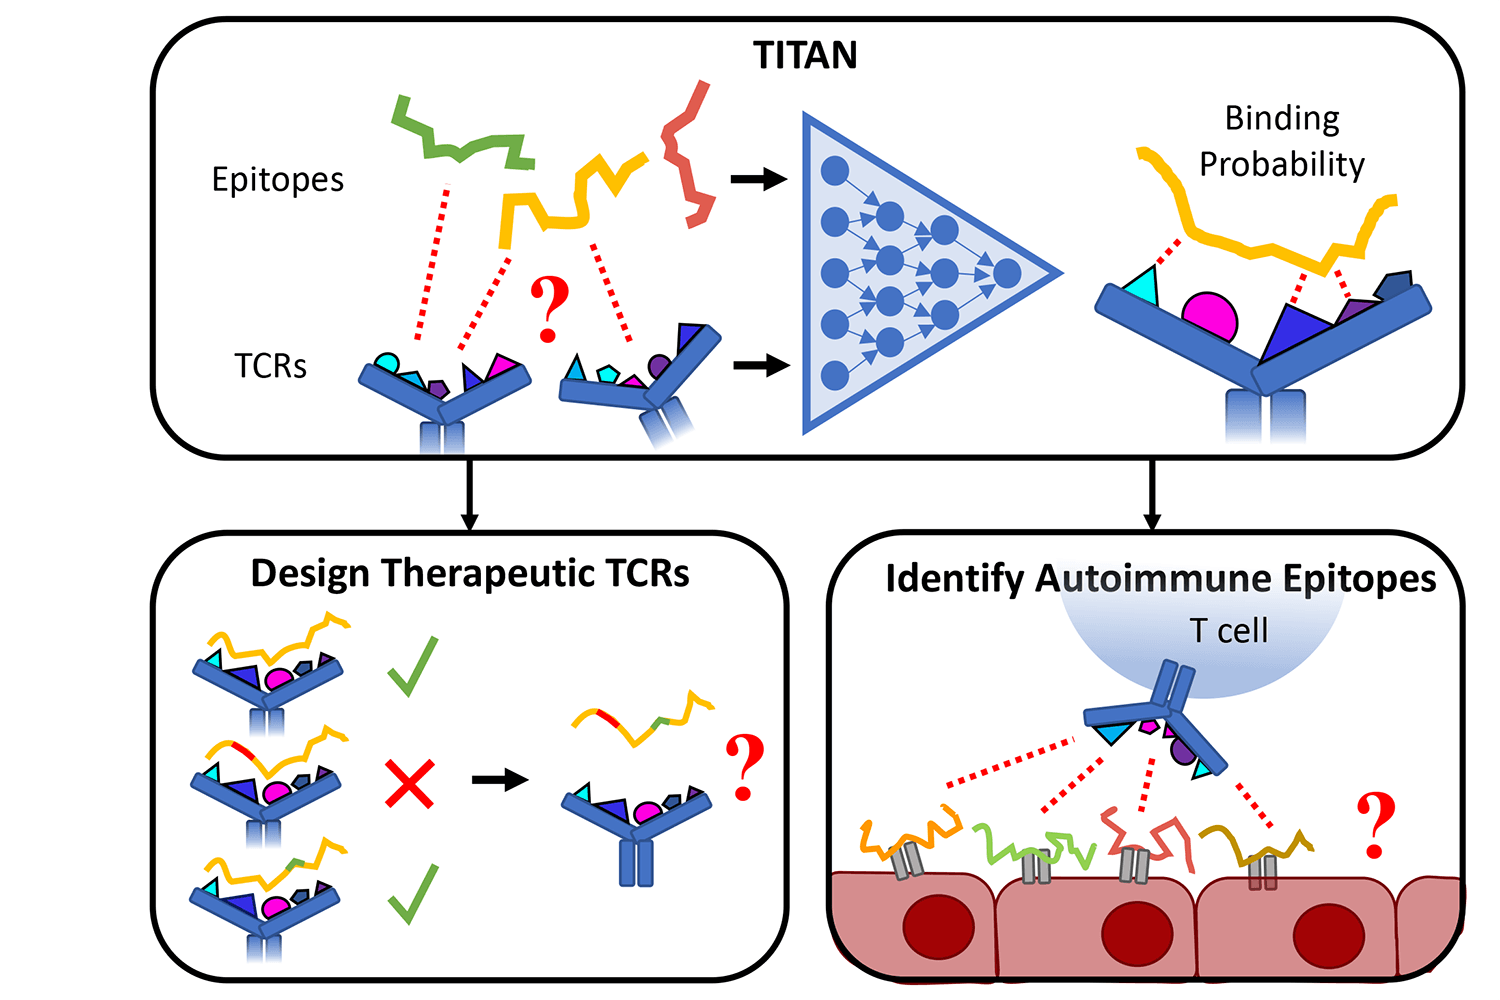 How TITAN predicts T cell receptor specificity.